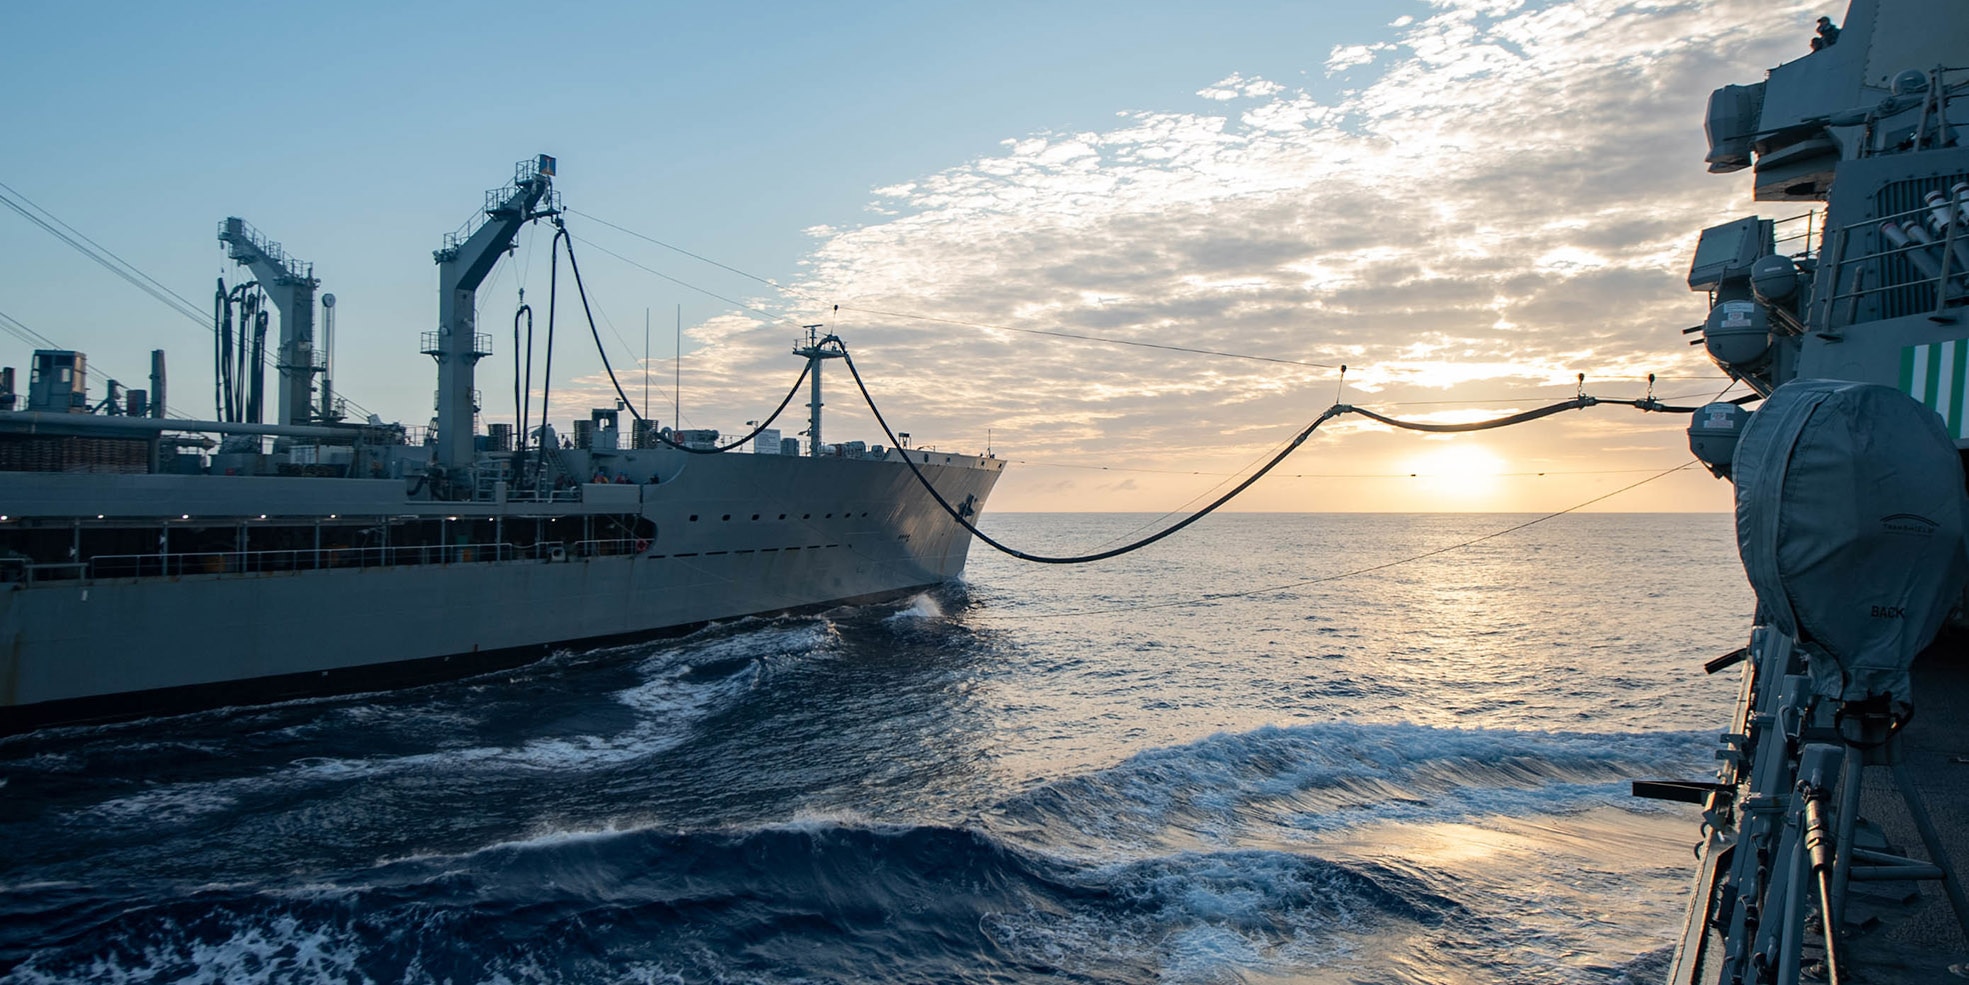 Arleigh Burke-class guided-missile destroyer USS Spruance (DDG 111) conducts replenishment-at-sea with fleet replenishment oiler USNS Guadalupe (T-AO 200).